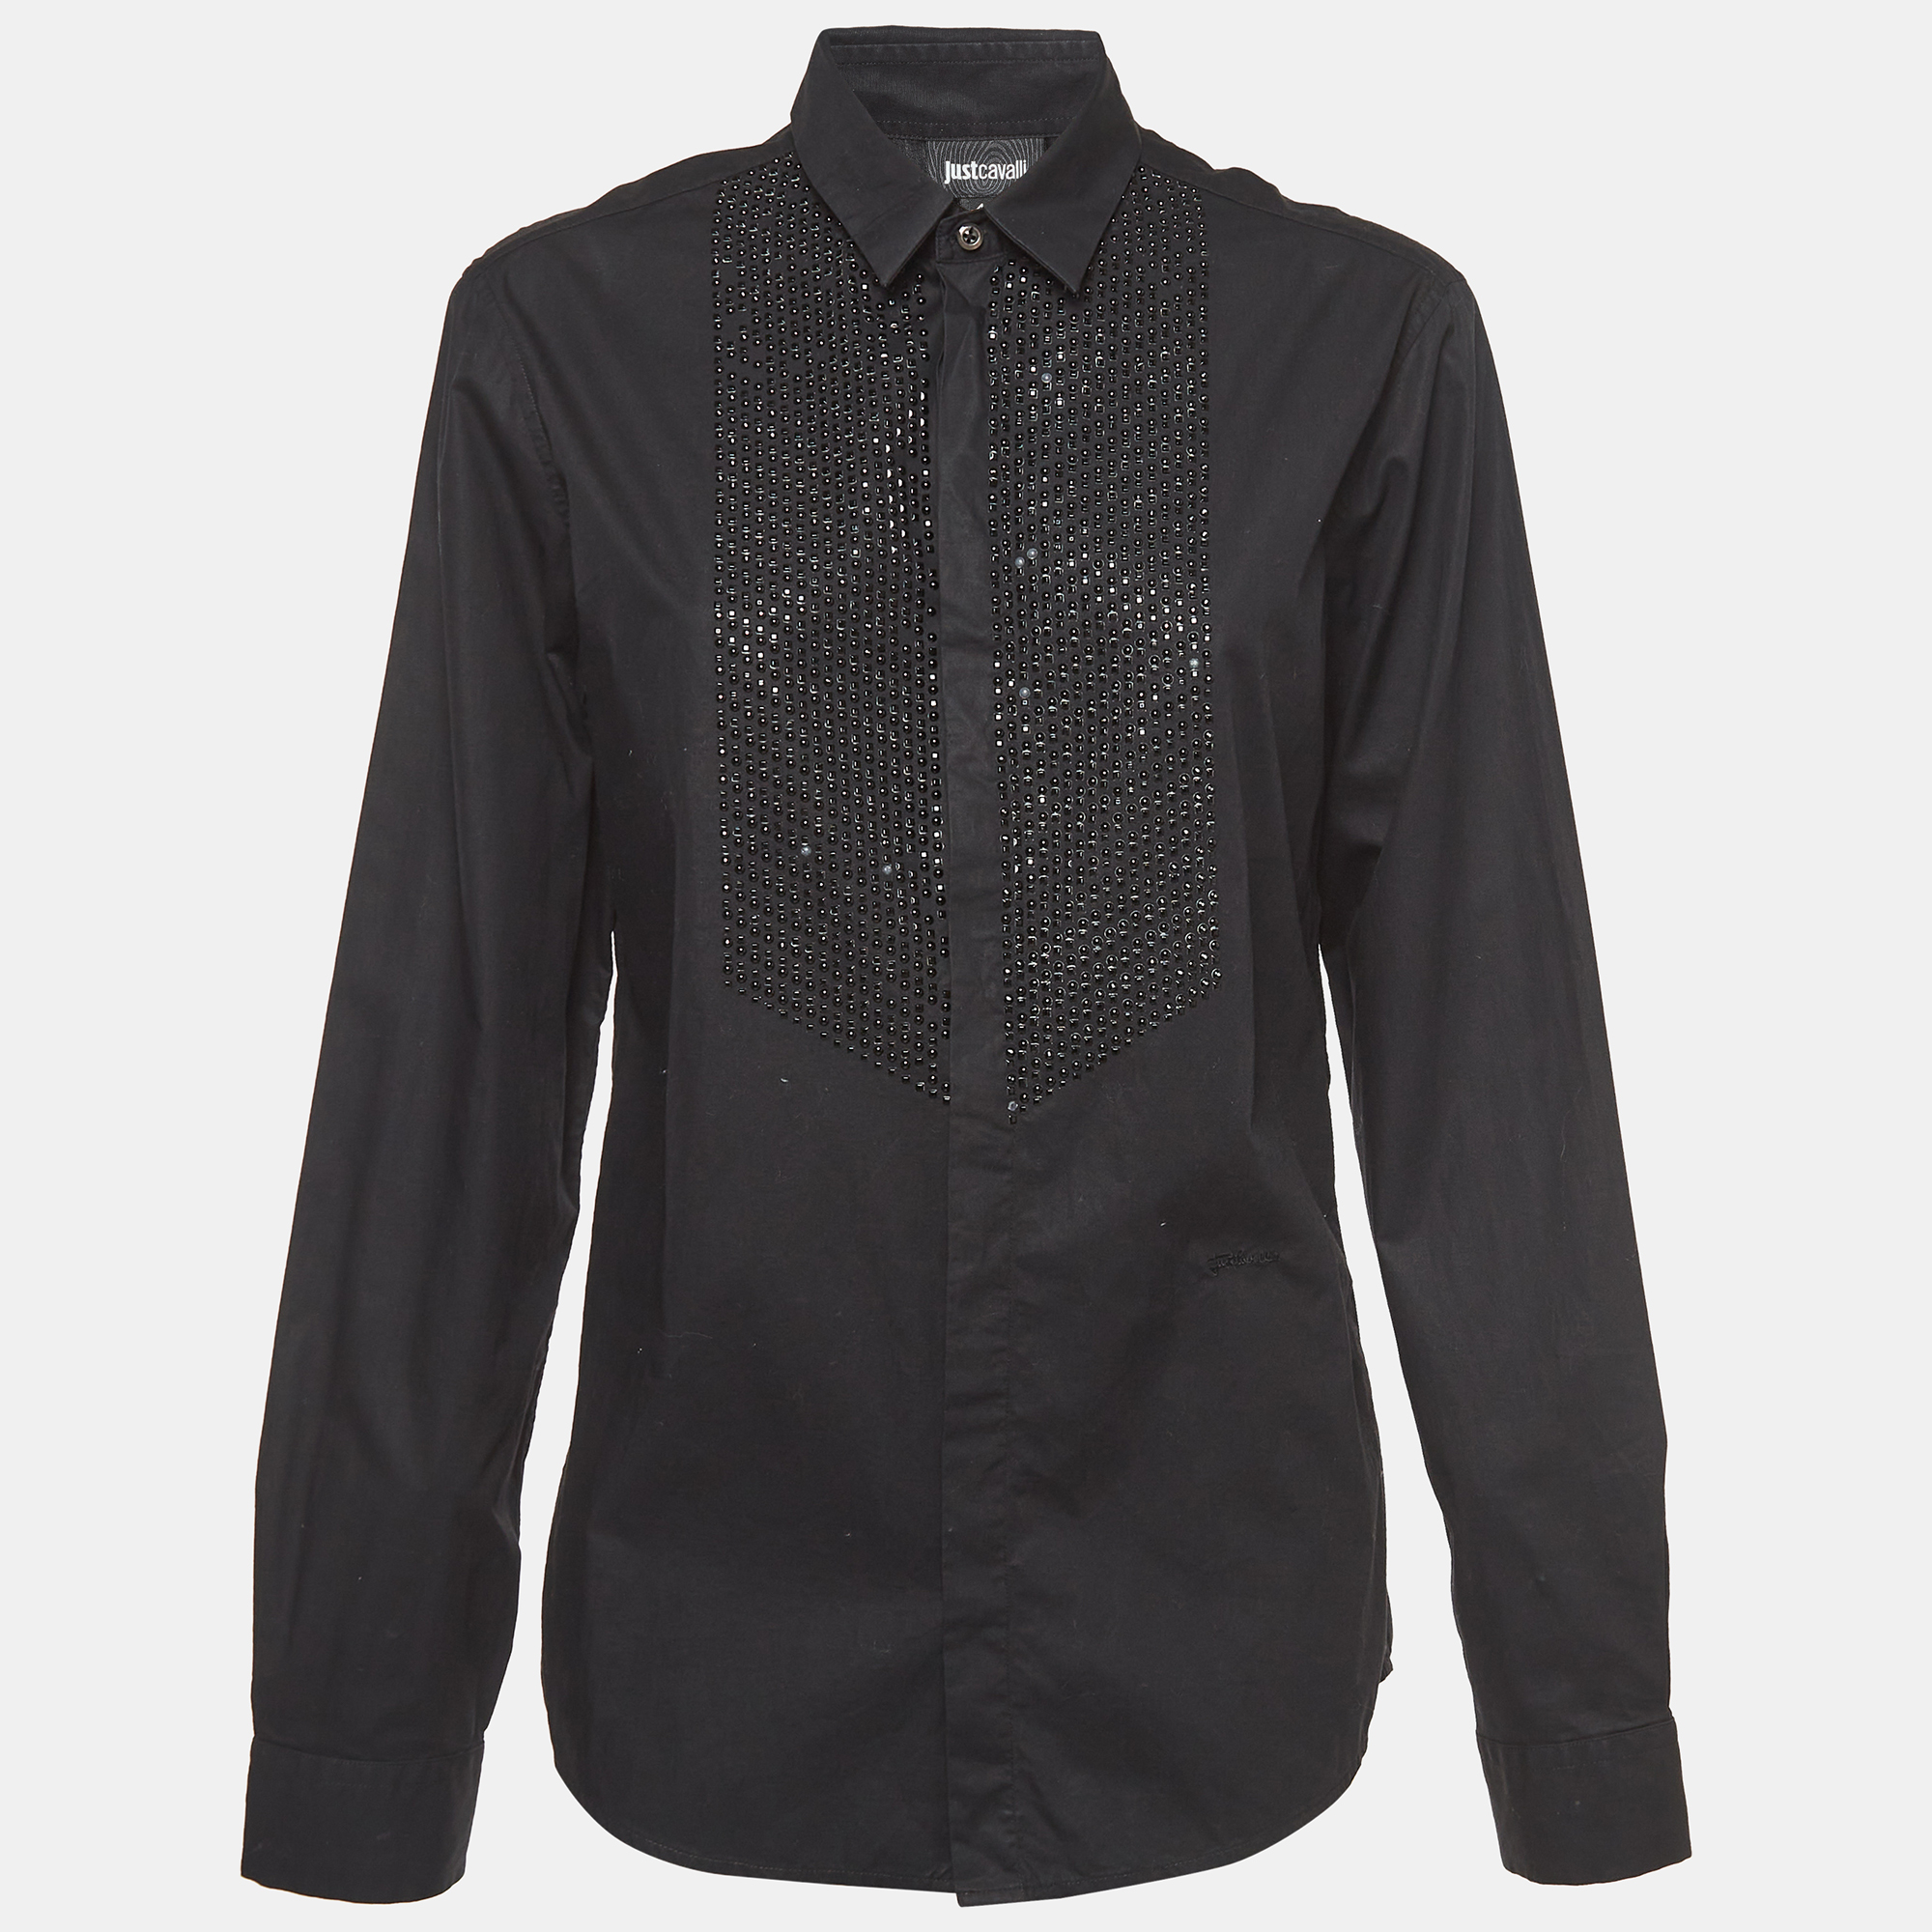 Shirts are an indispensable part of a wardrobe so this brand brings you a creation that is both versatile and stylish. It has been tailored from quality material in a versatile shade. The shirt is detailed with signature elements and a comfortable fit.